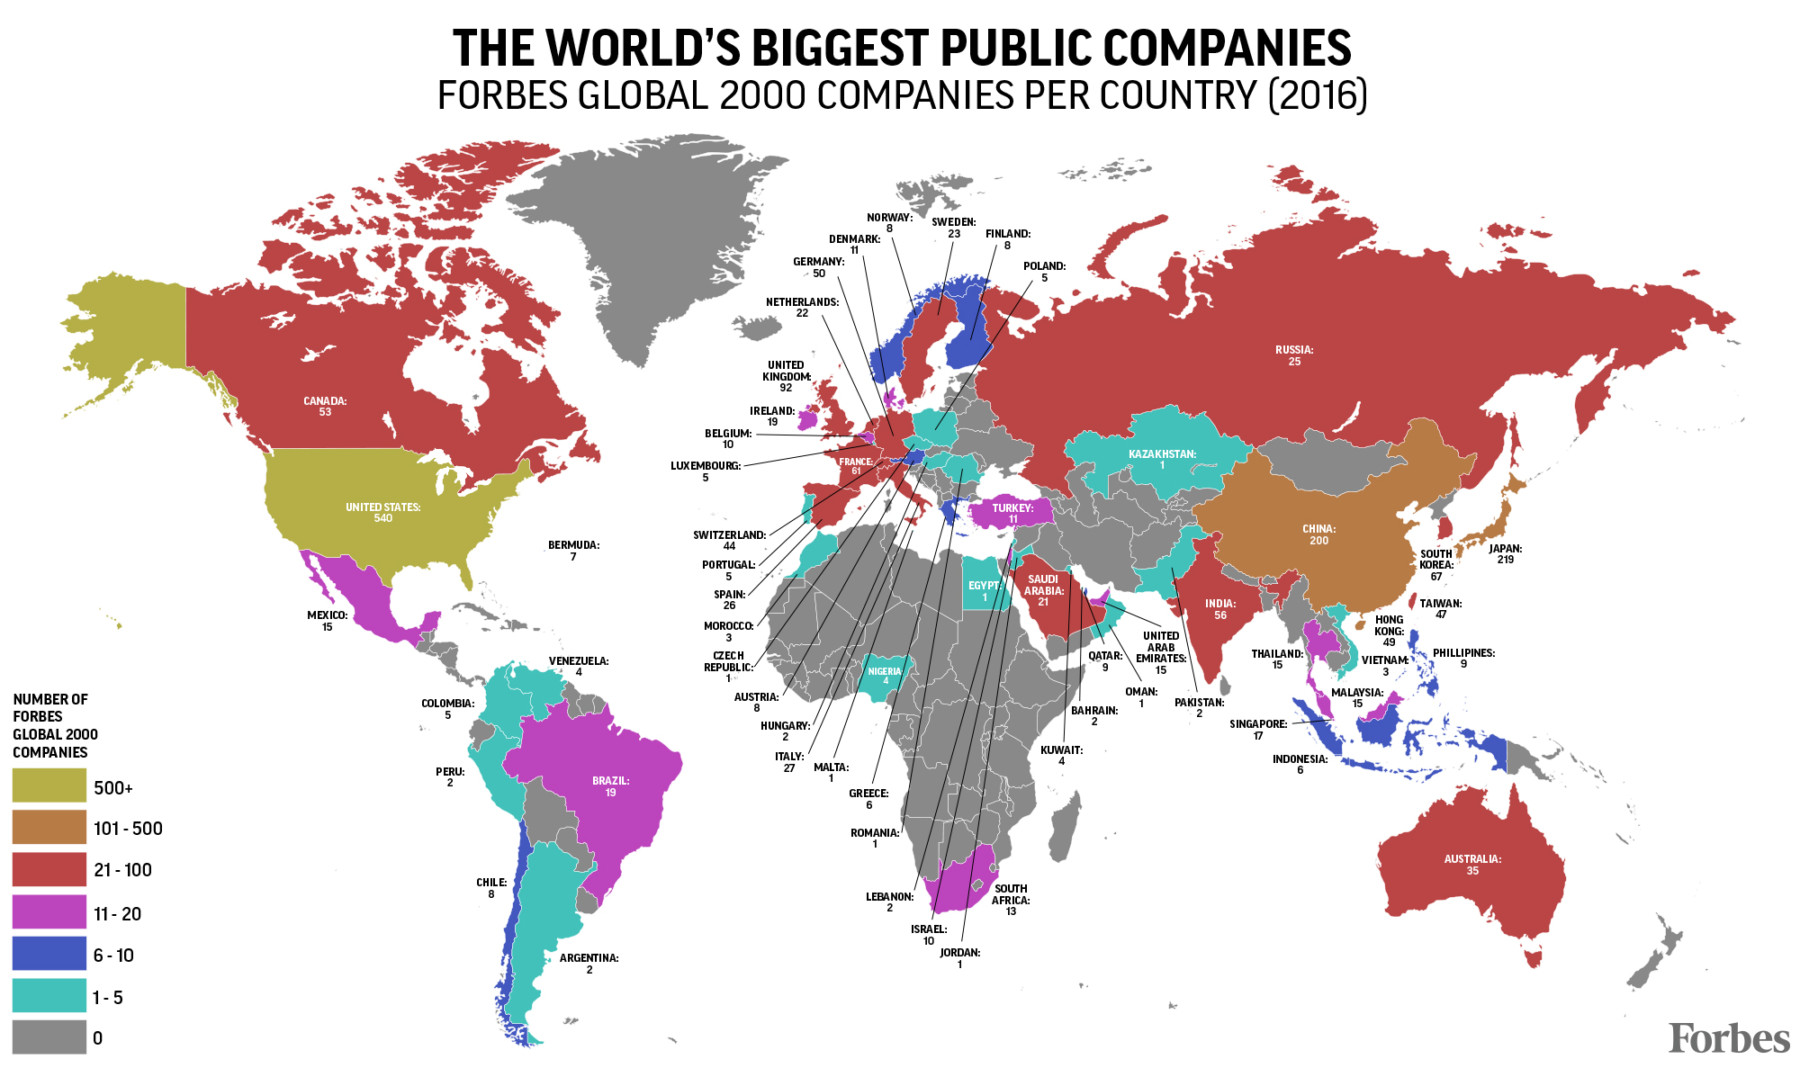 Ranked: The 100 Biggest Public Companies in the World